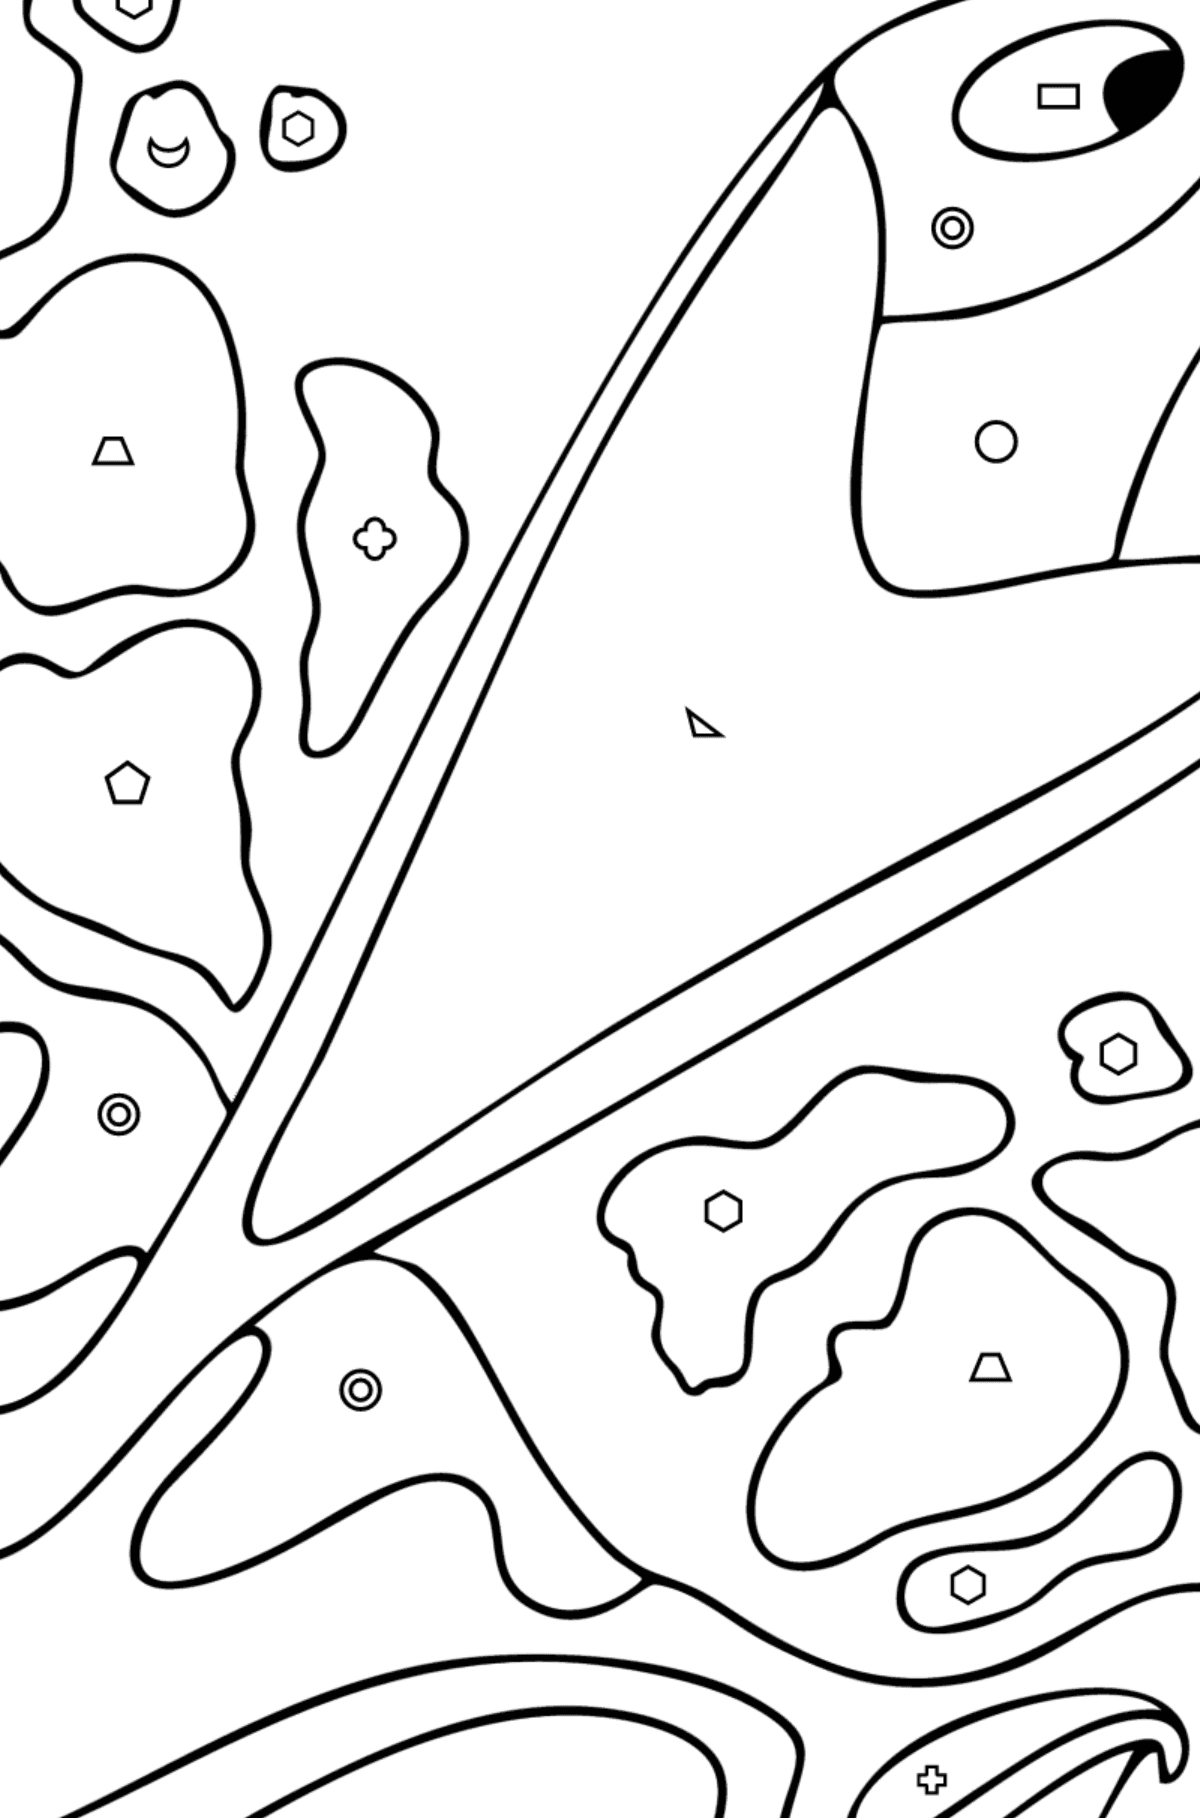 Electric Stingray coloring page - Coloring by Geometric Shapes for Kids